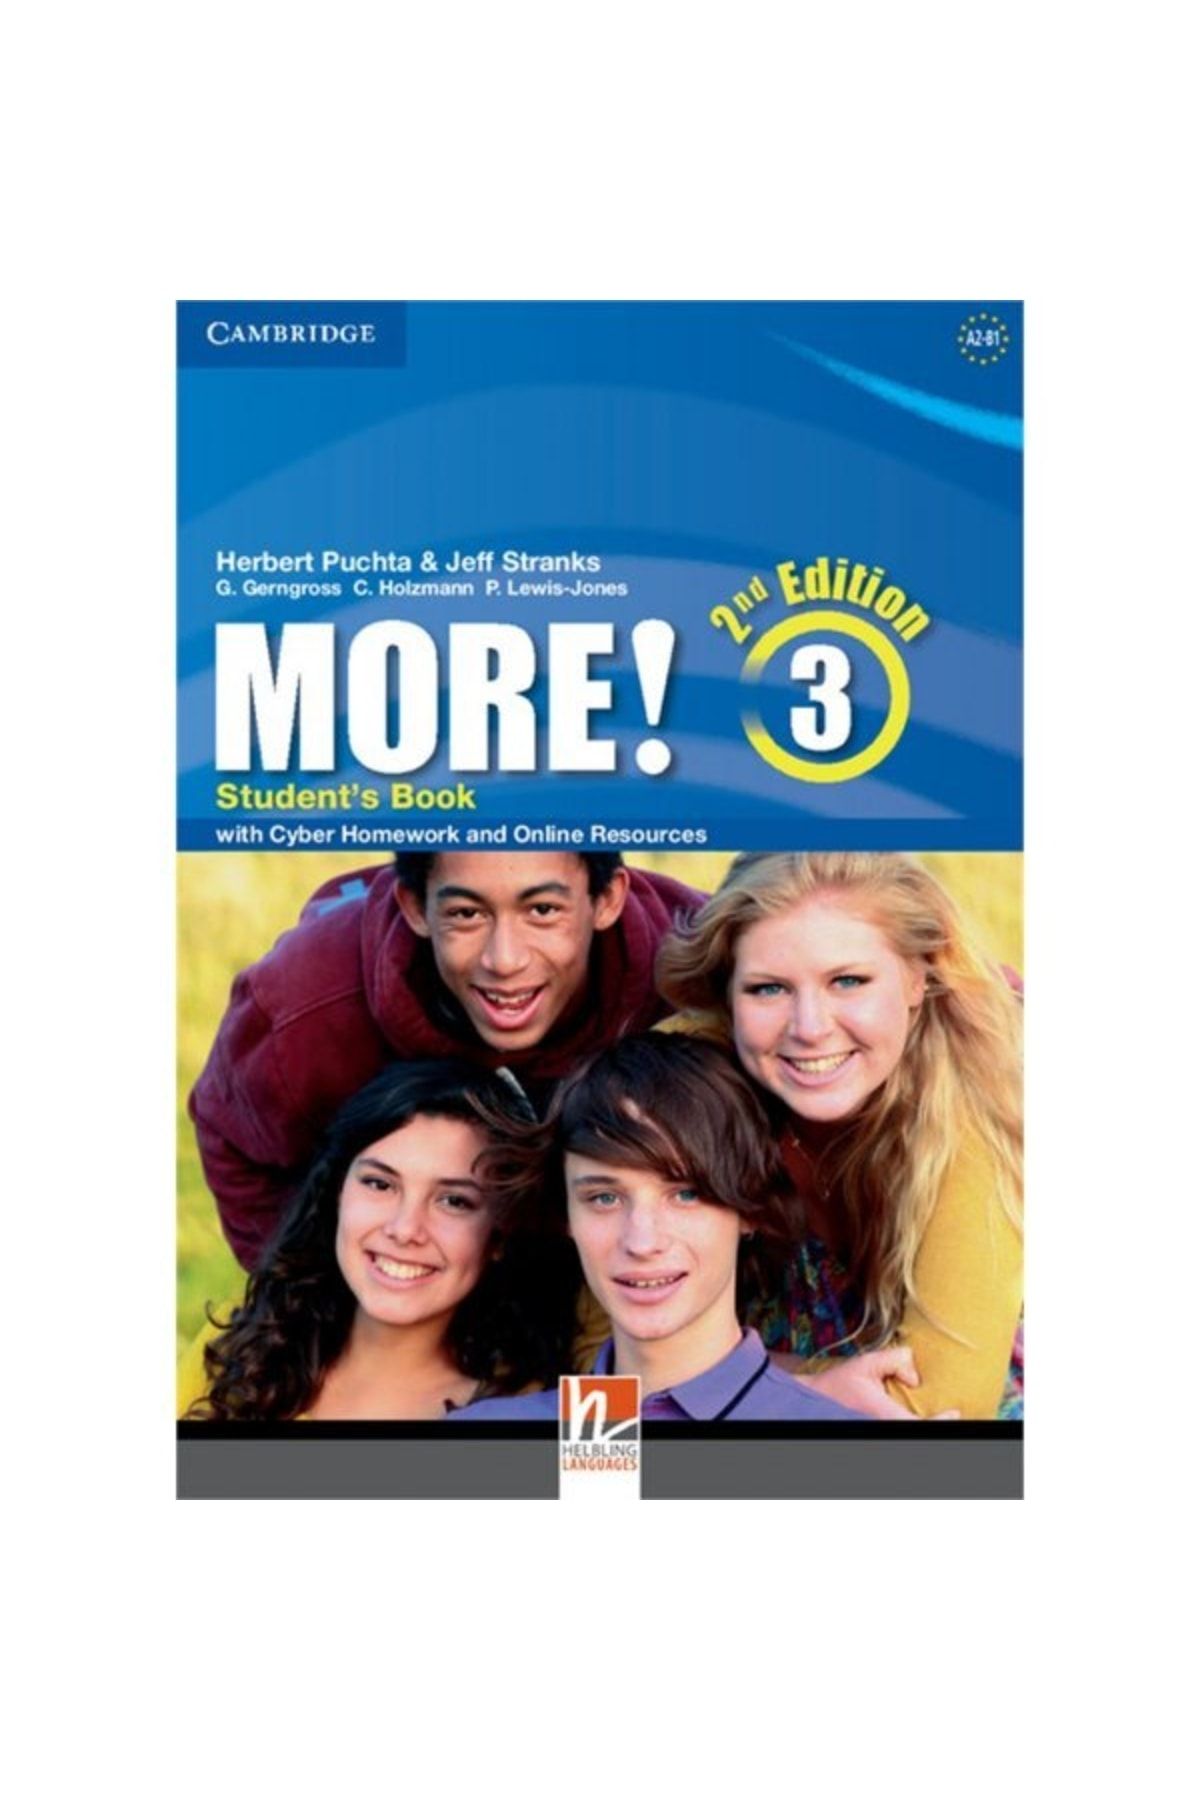 Cambridge University More! Level 3 Student39s Book With Cyber Homework And Online Resources 2nd Editio